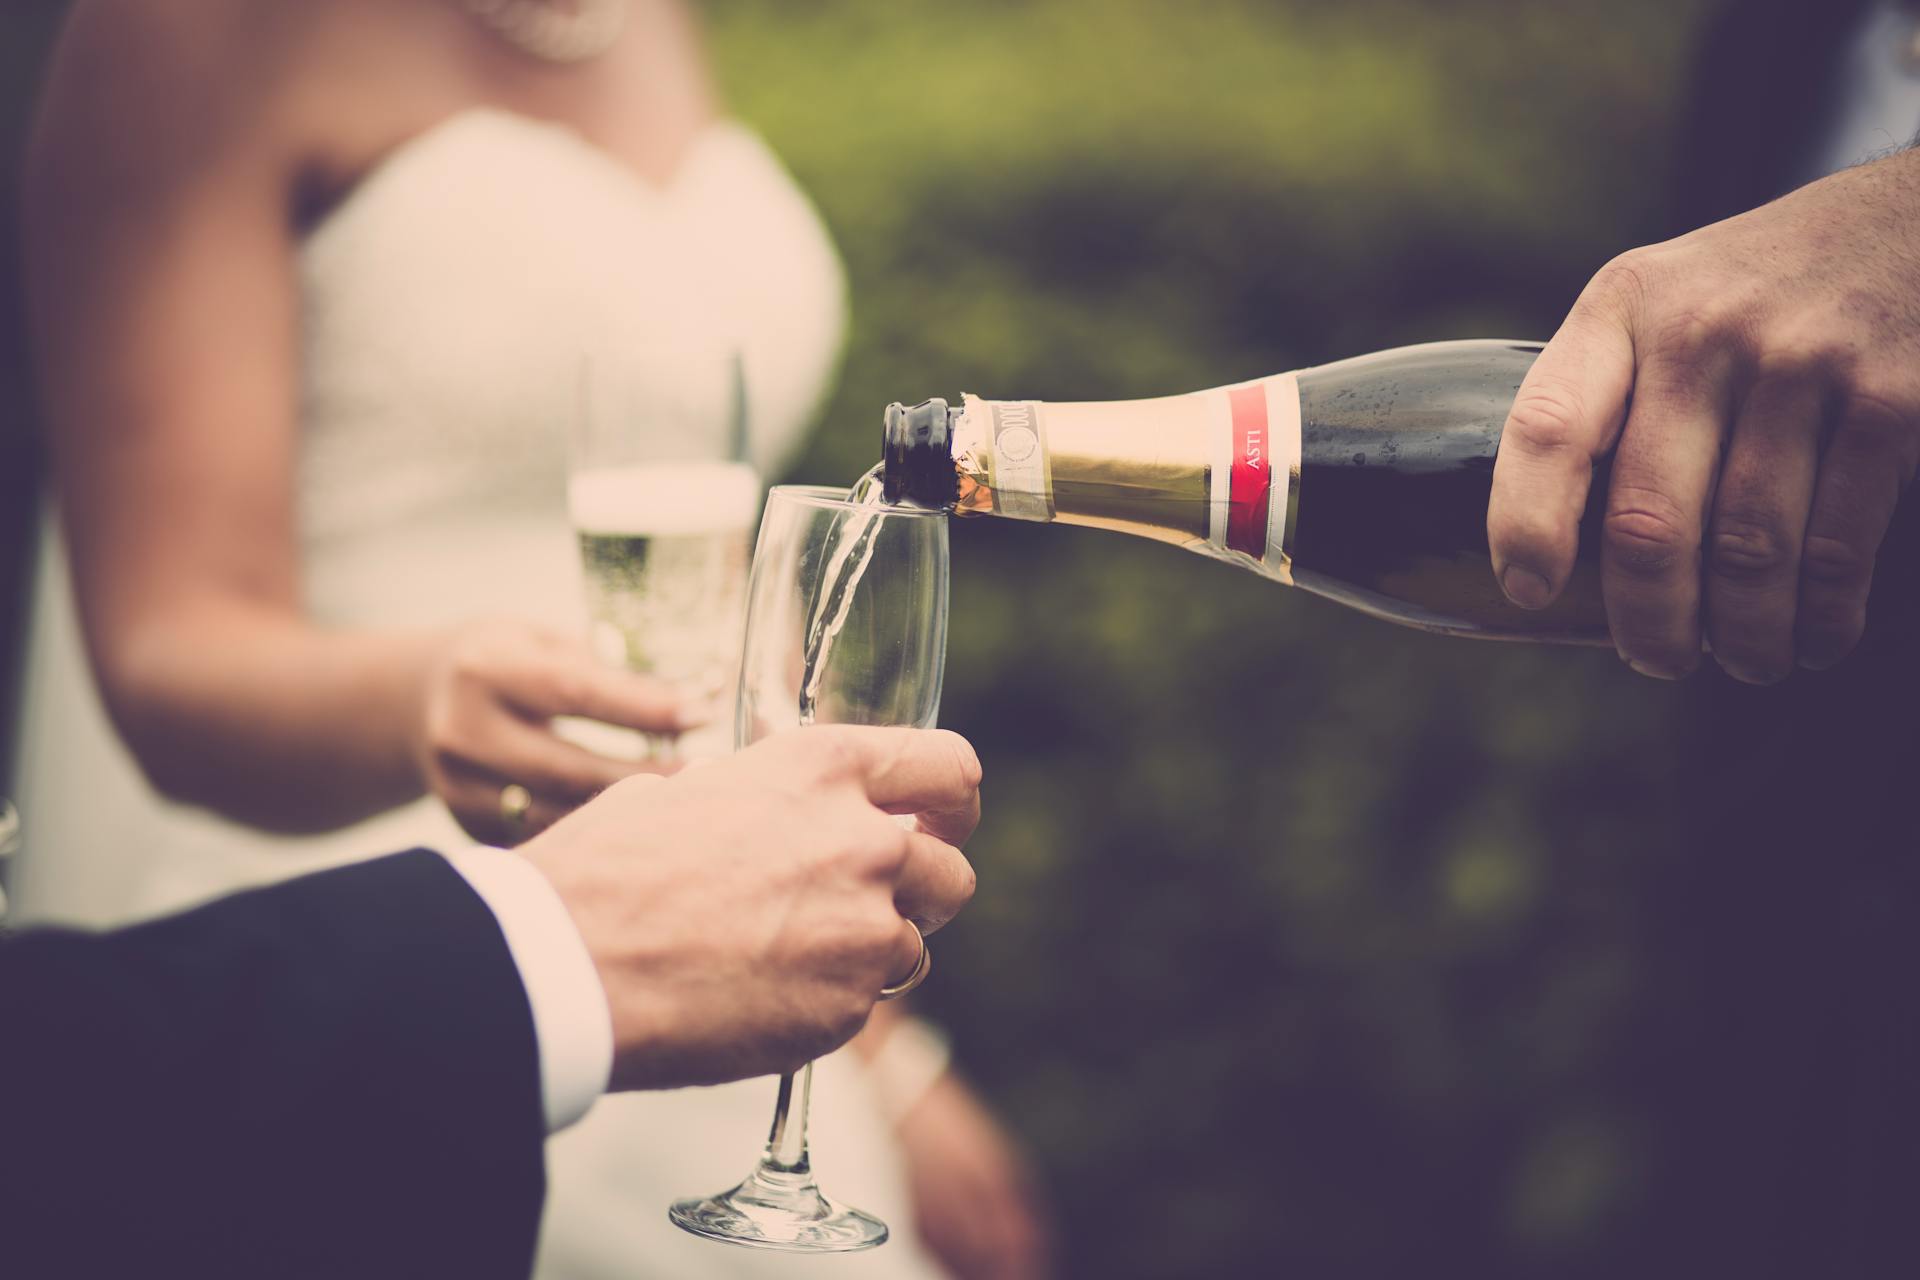 Newlyweds drinking champagne | Source: Pexels